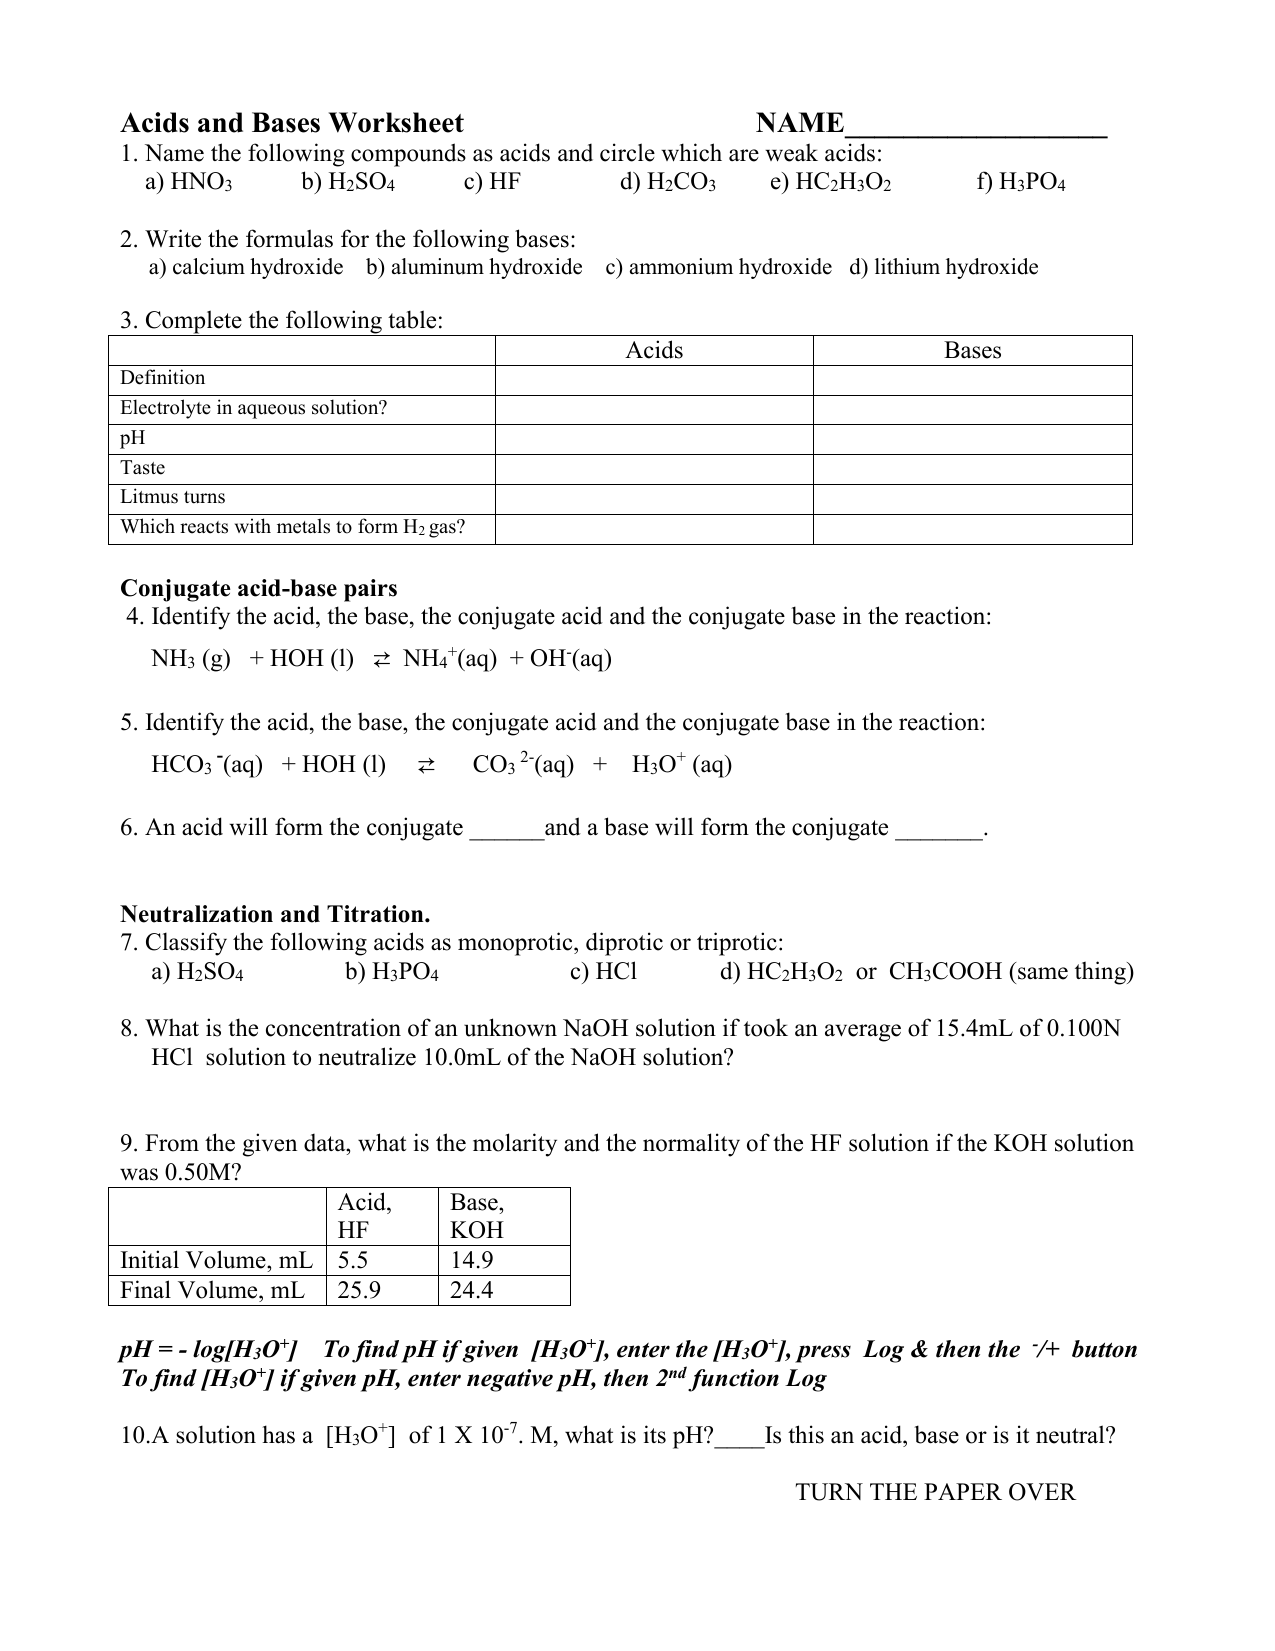 Acids and Bases Worksheet Throughout Acids And Bases Worksheet Answers